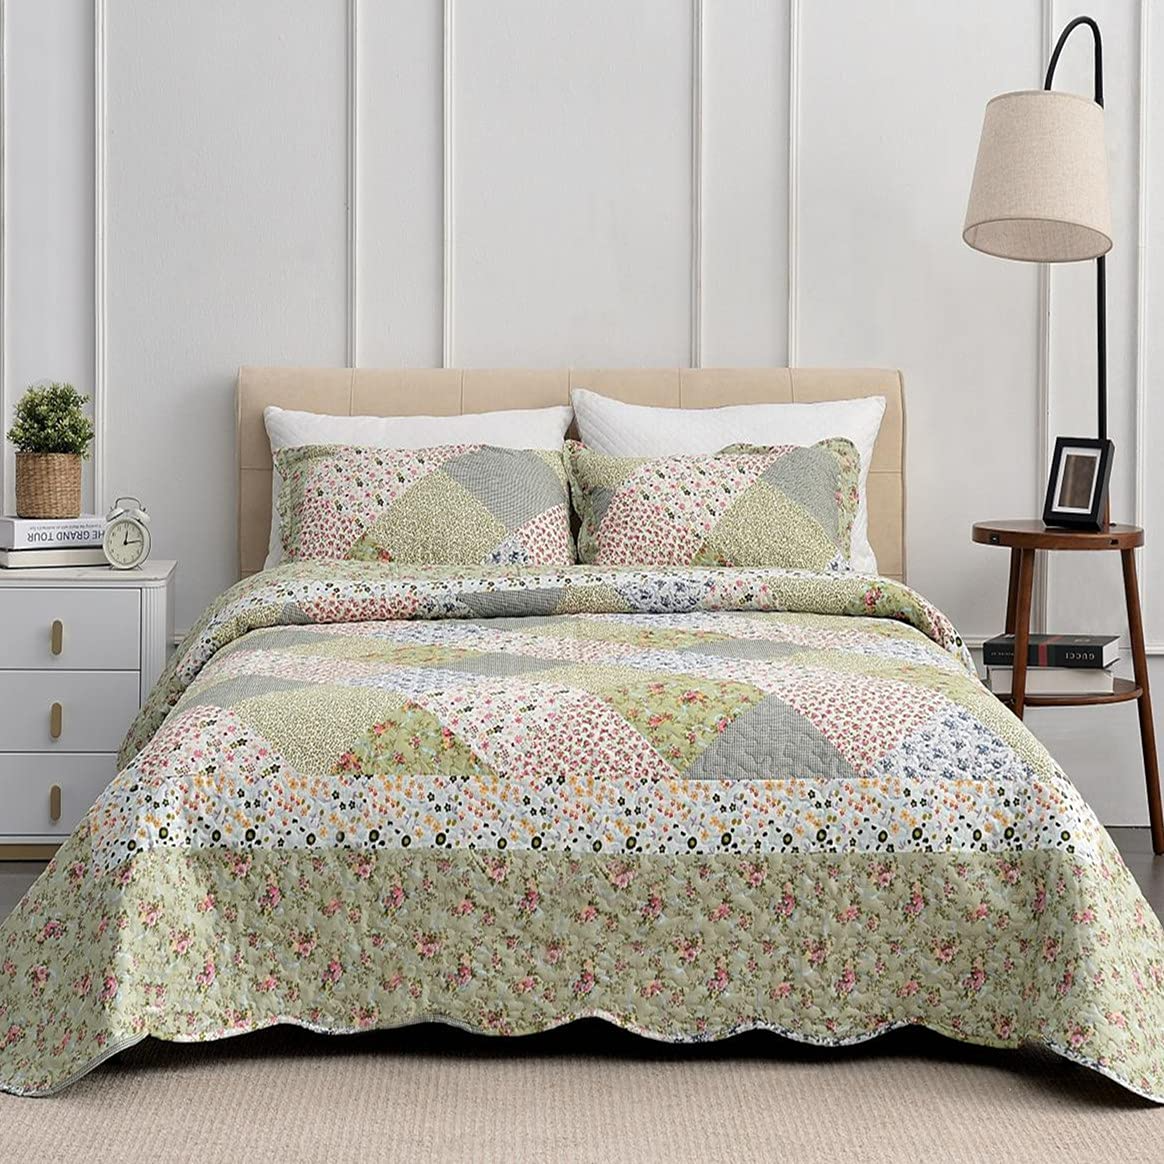 Bohemian Flower Stitching 3 Pieces Quilt Set with 2 Pillowcases